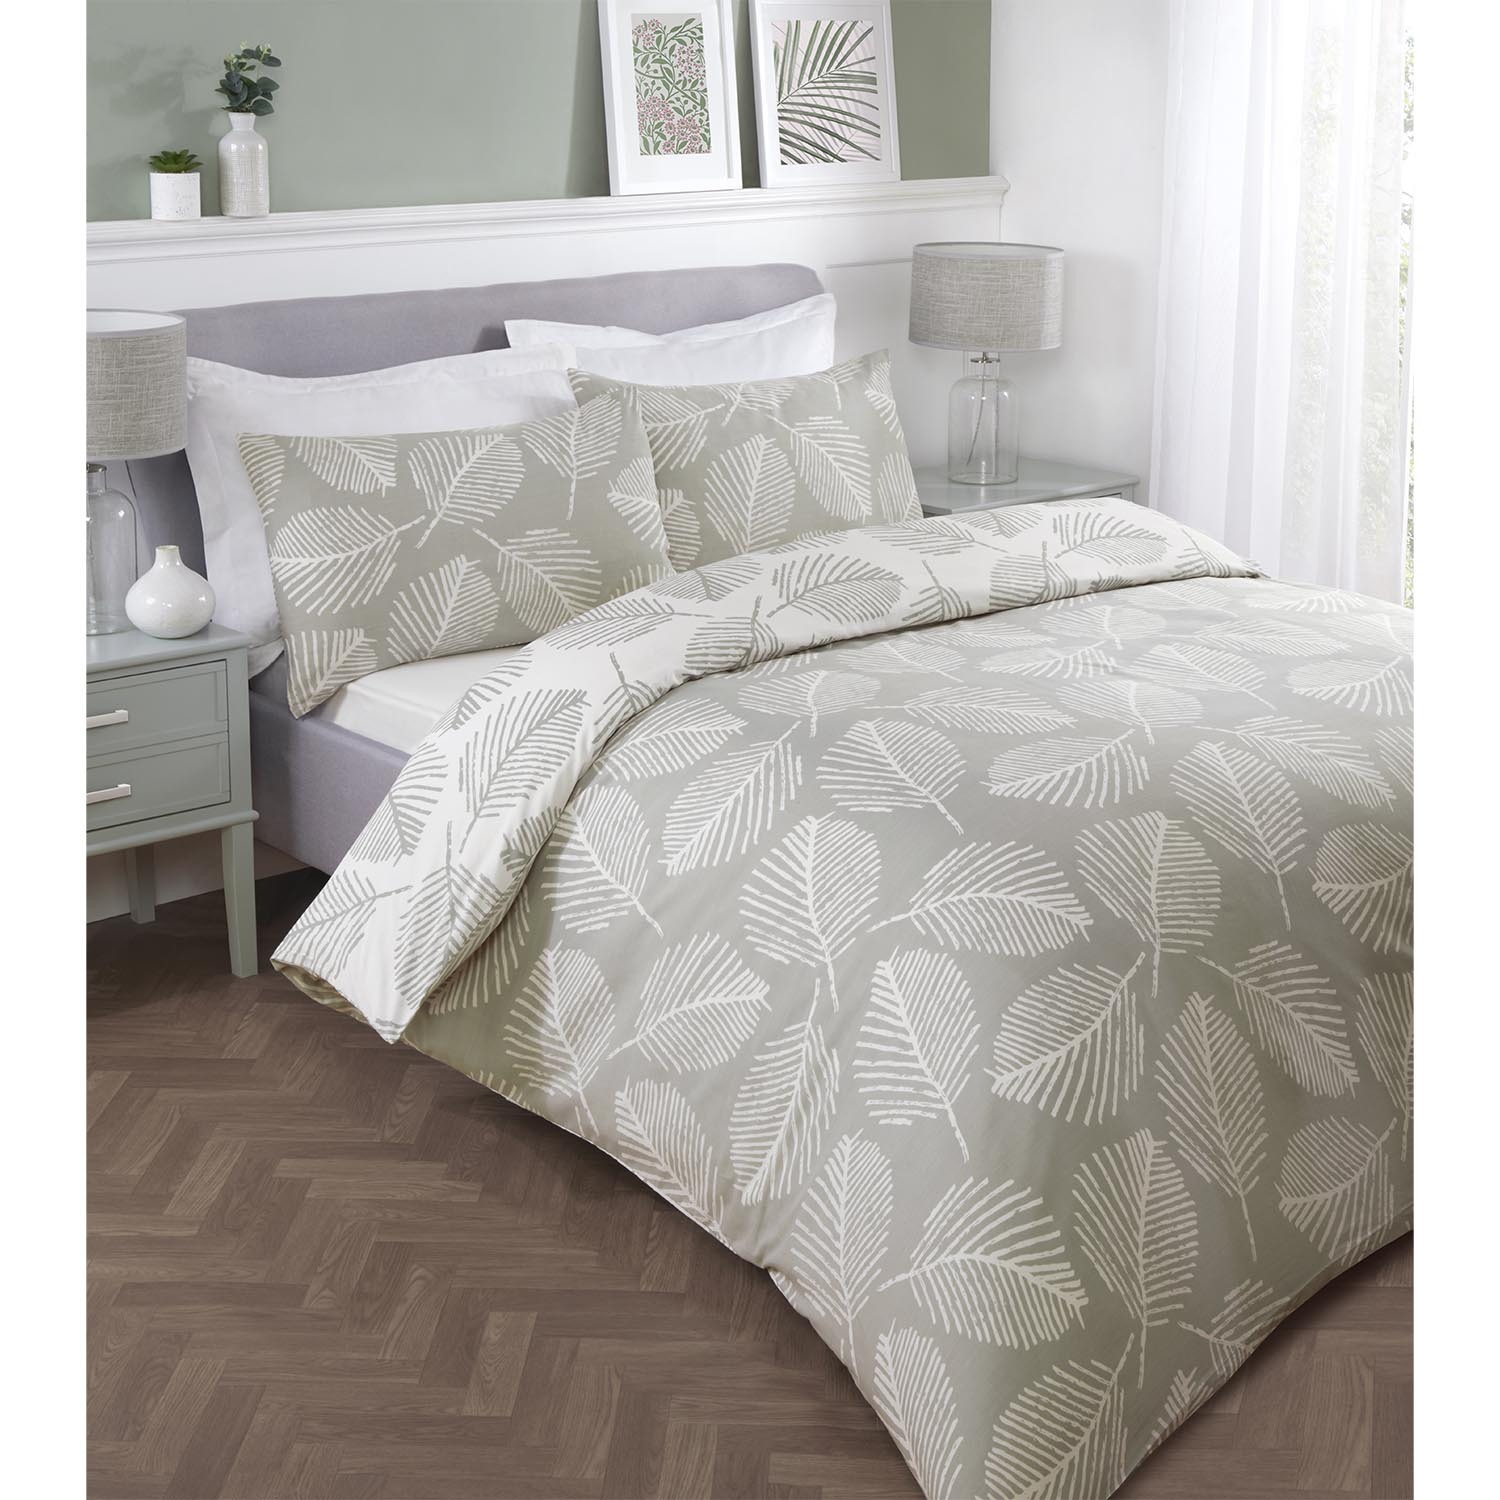 Falling Leaves Duvet Cover and Pillowcase Set - Green and White / Single Image 2